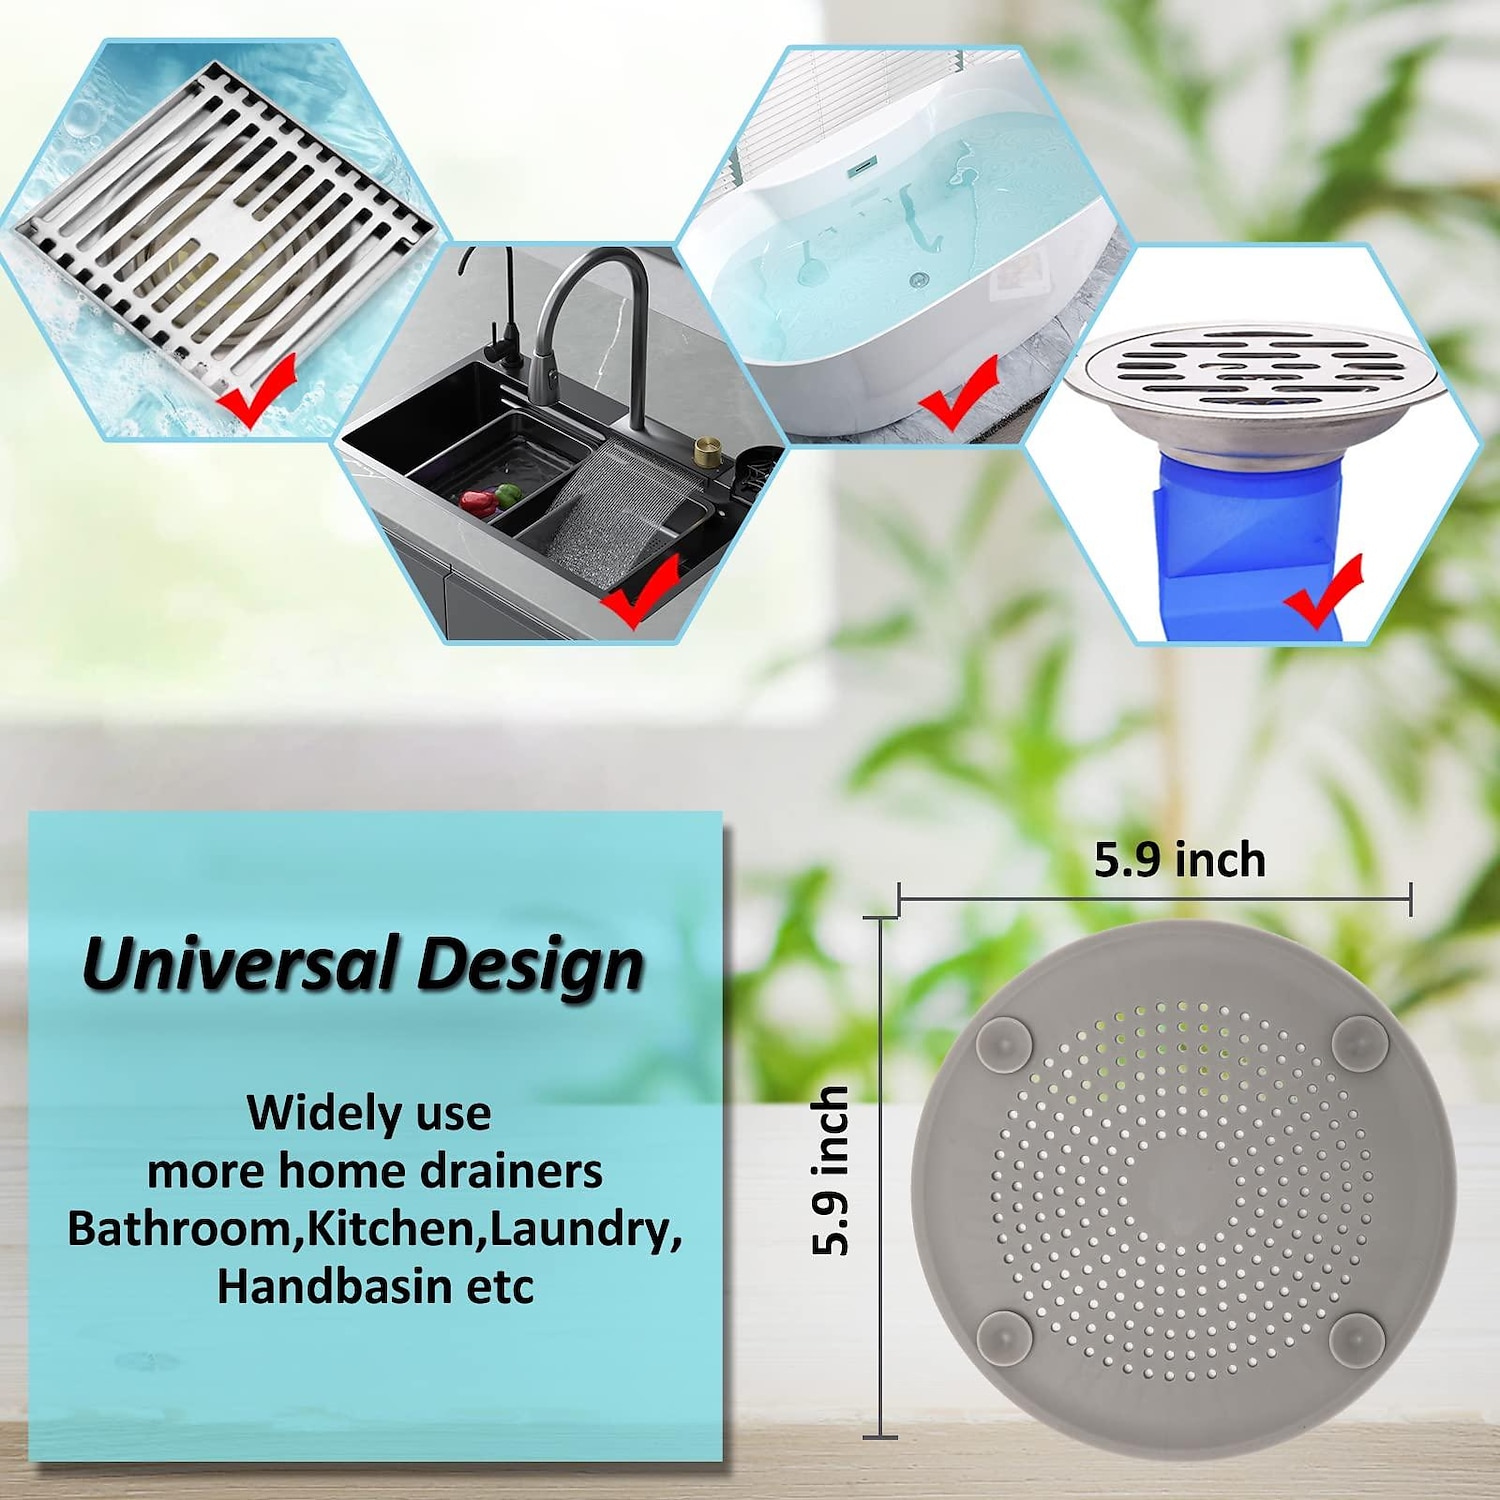 2 Pcs Shower Drain Hair Catcher, Silicone Hair Stopper with Suction Cup Round  Shower Drain Cover for Bathroom, Bathtub, Kitchen (White + Grey)